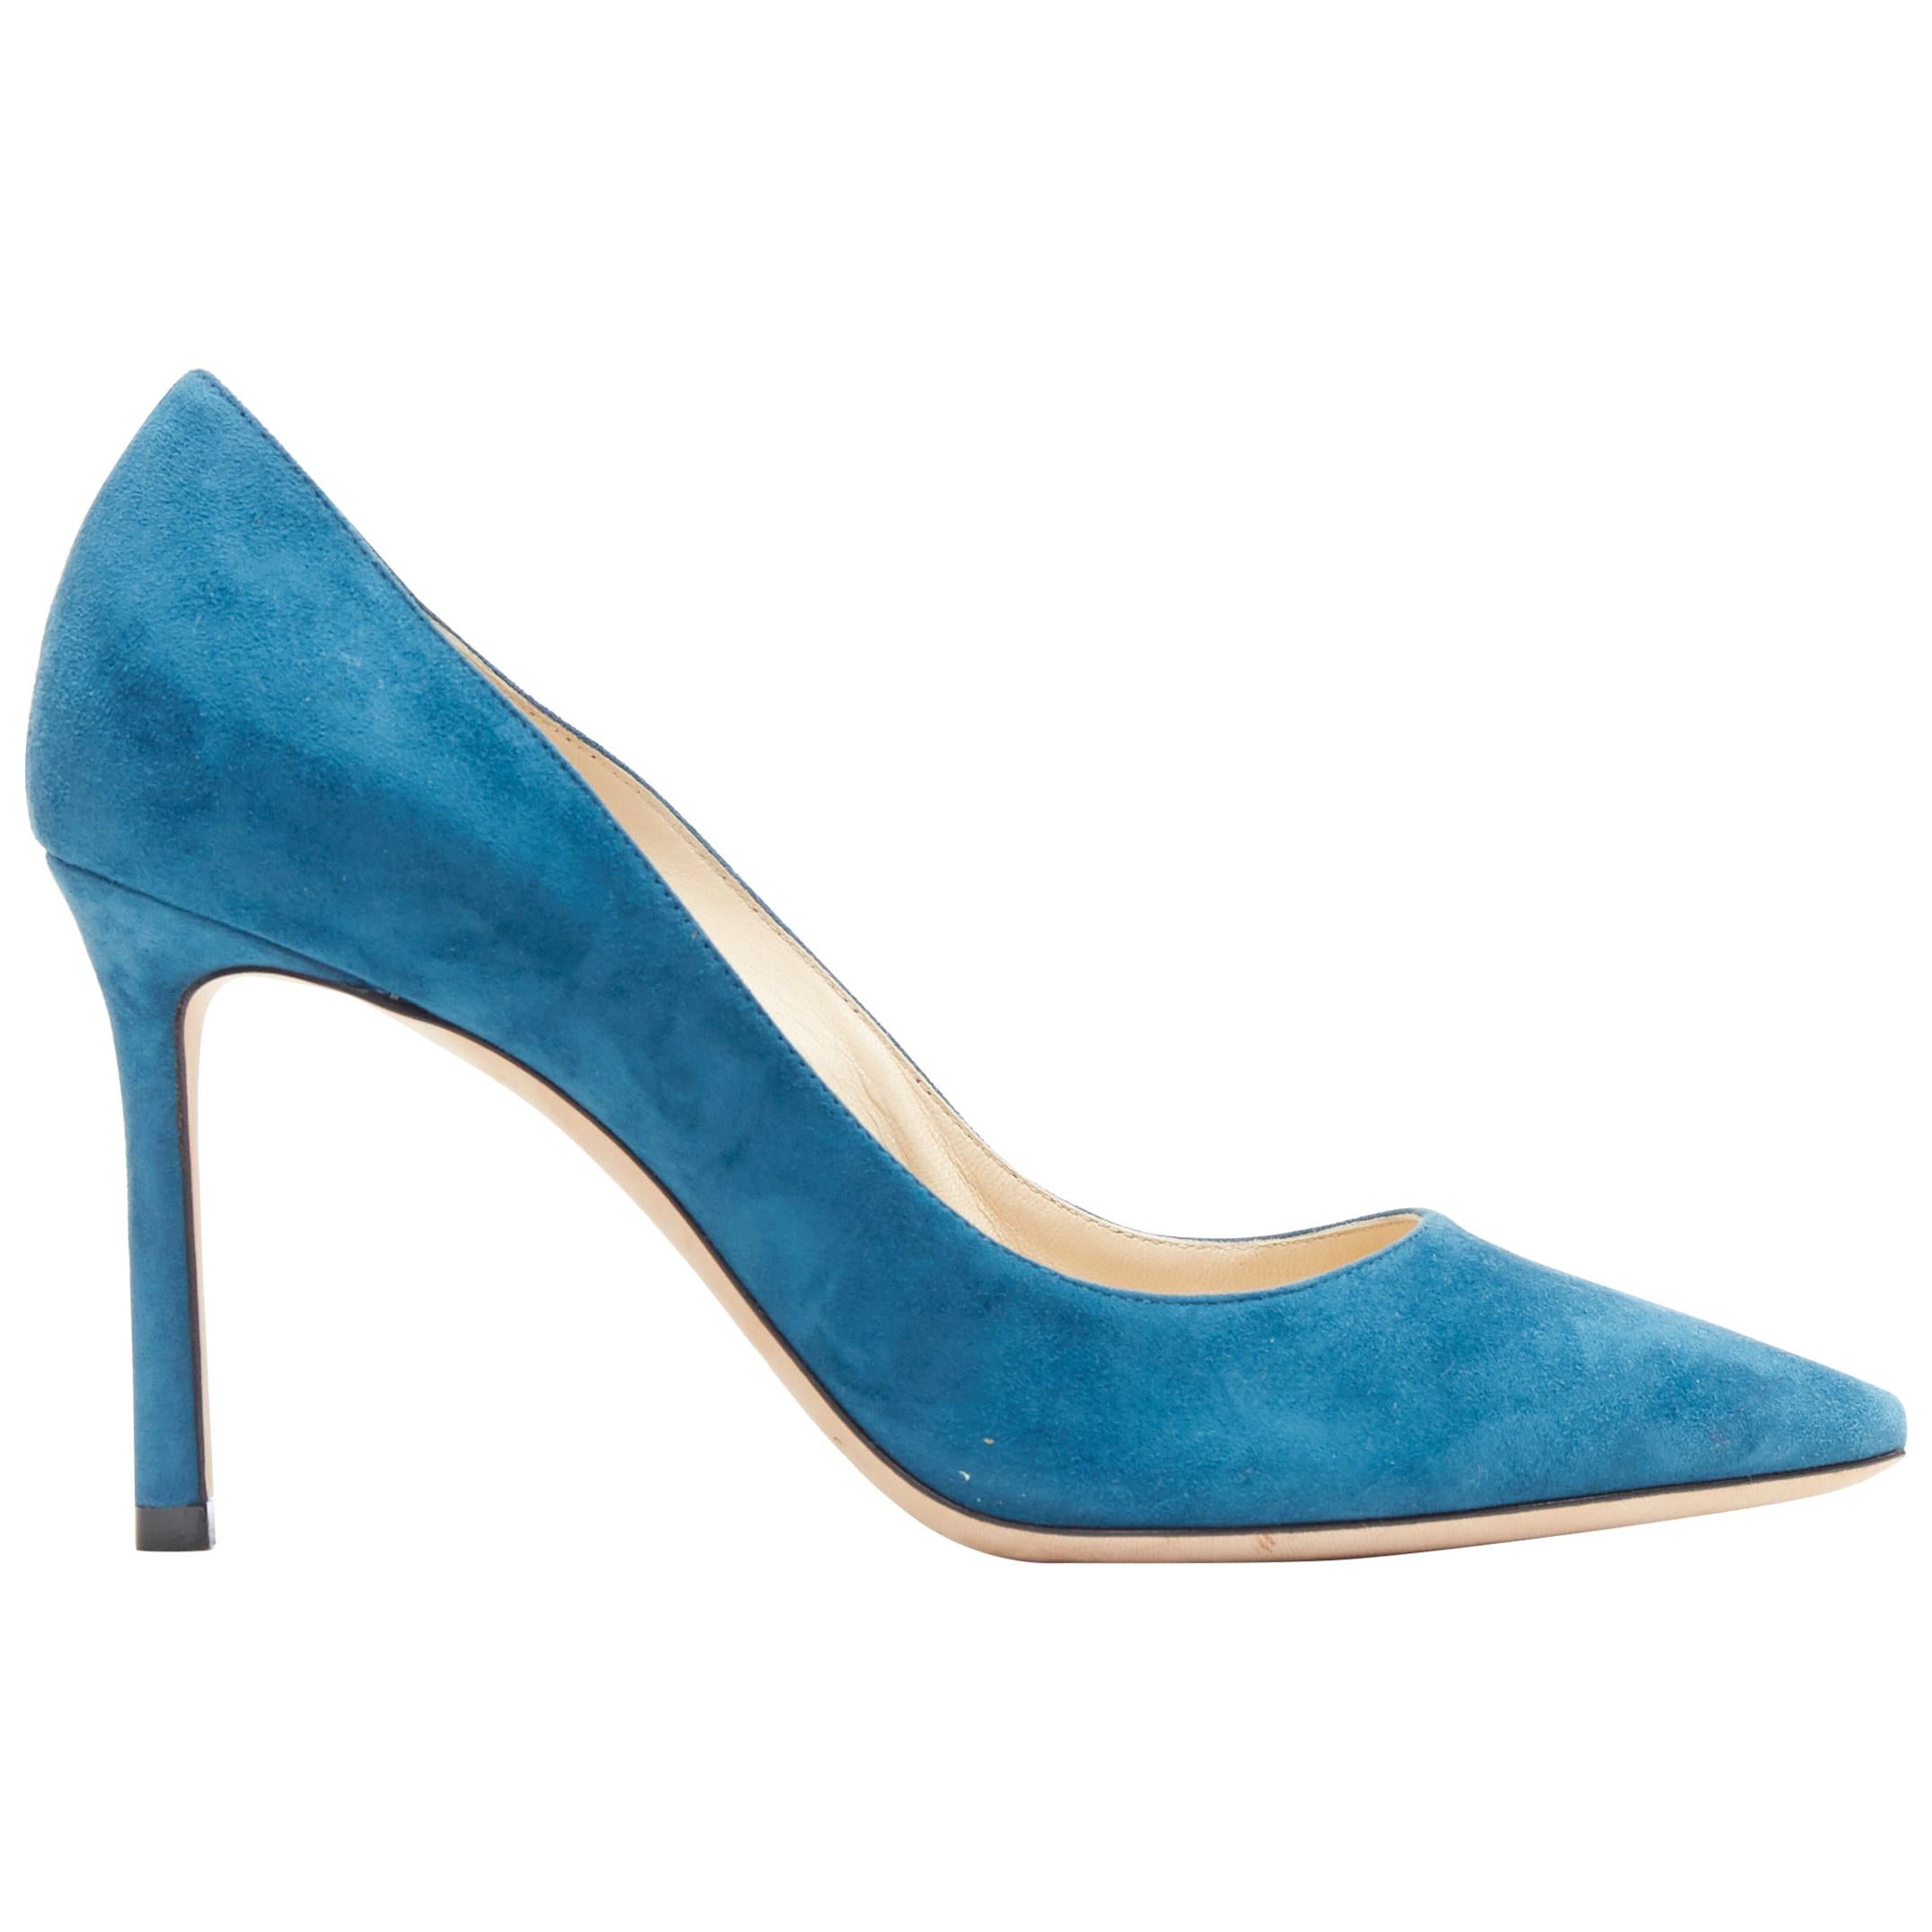 JIMMY CHOO Romy 85 teal blue suede leather point toe pigalle pump EU37